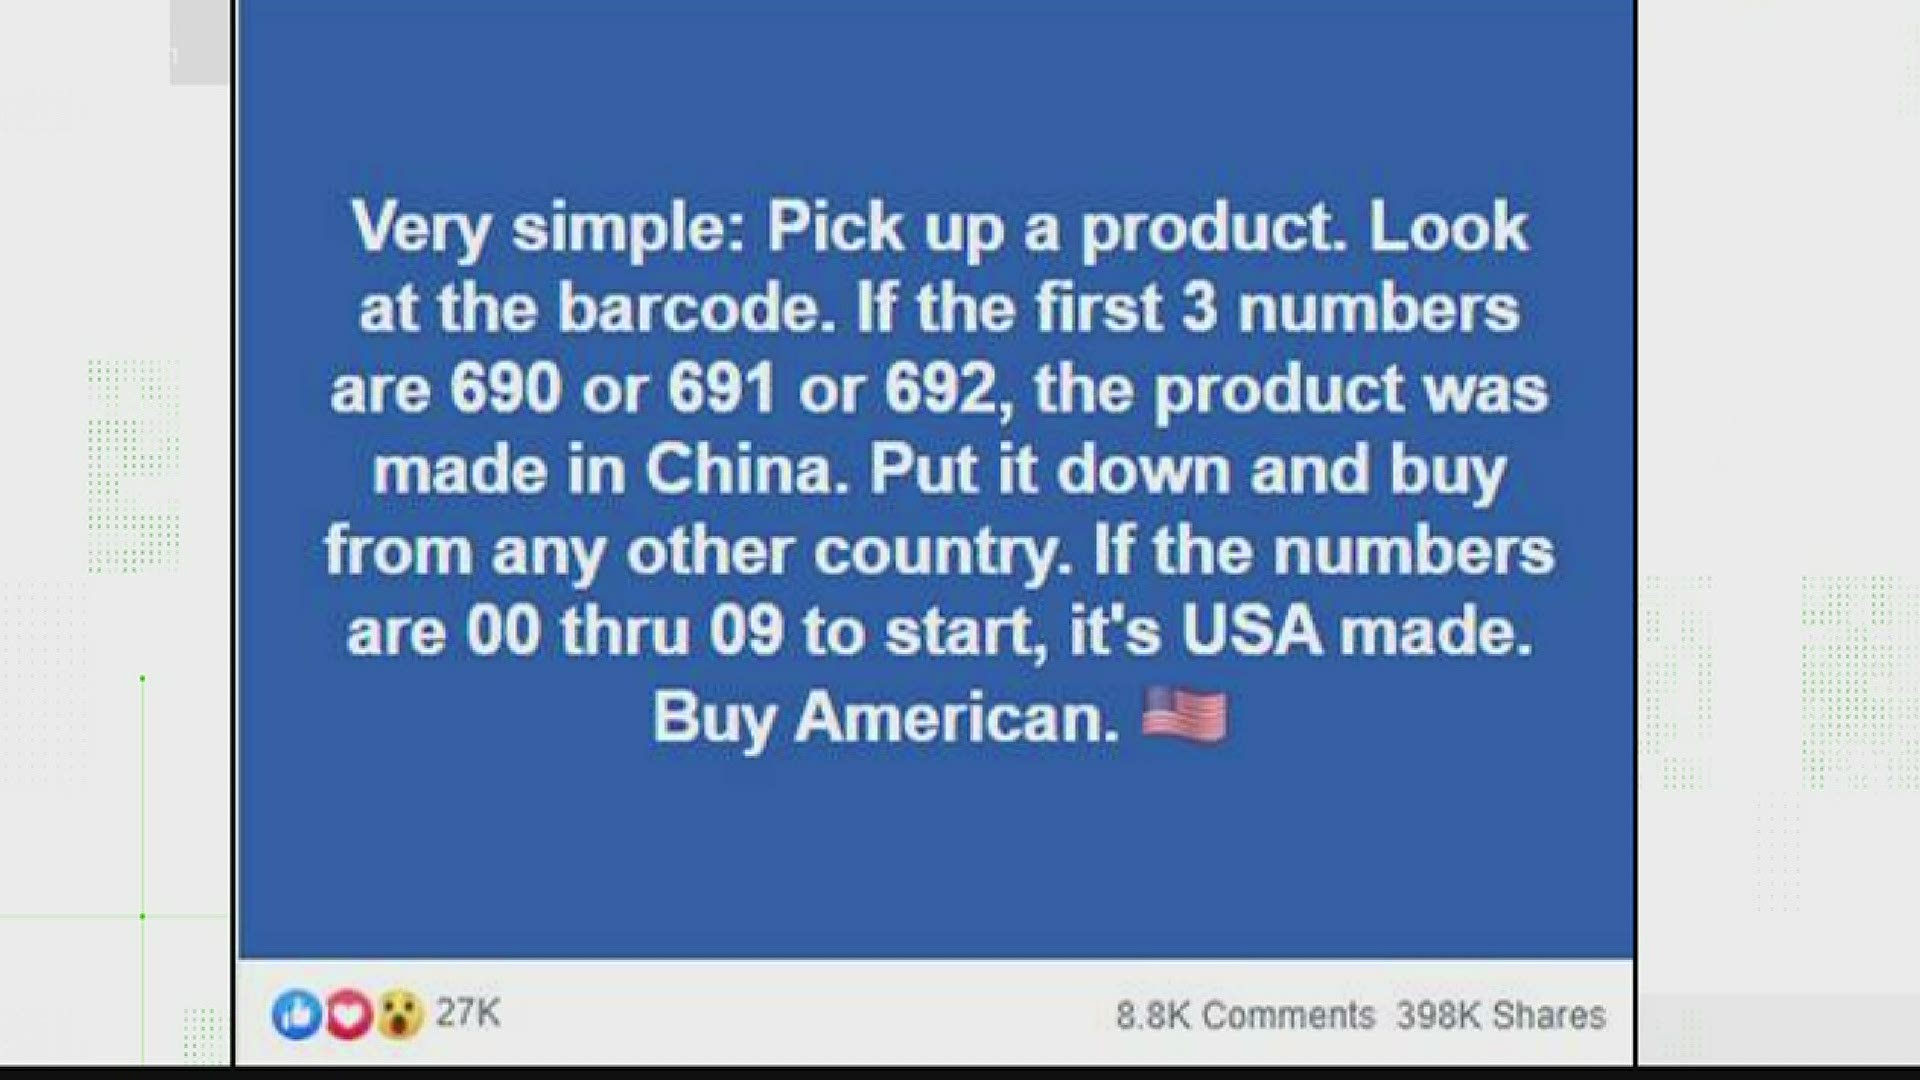 A viral post says that you can look at a product barcode to see where the item was manufactured. Our Verify expert says that's false.